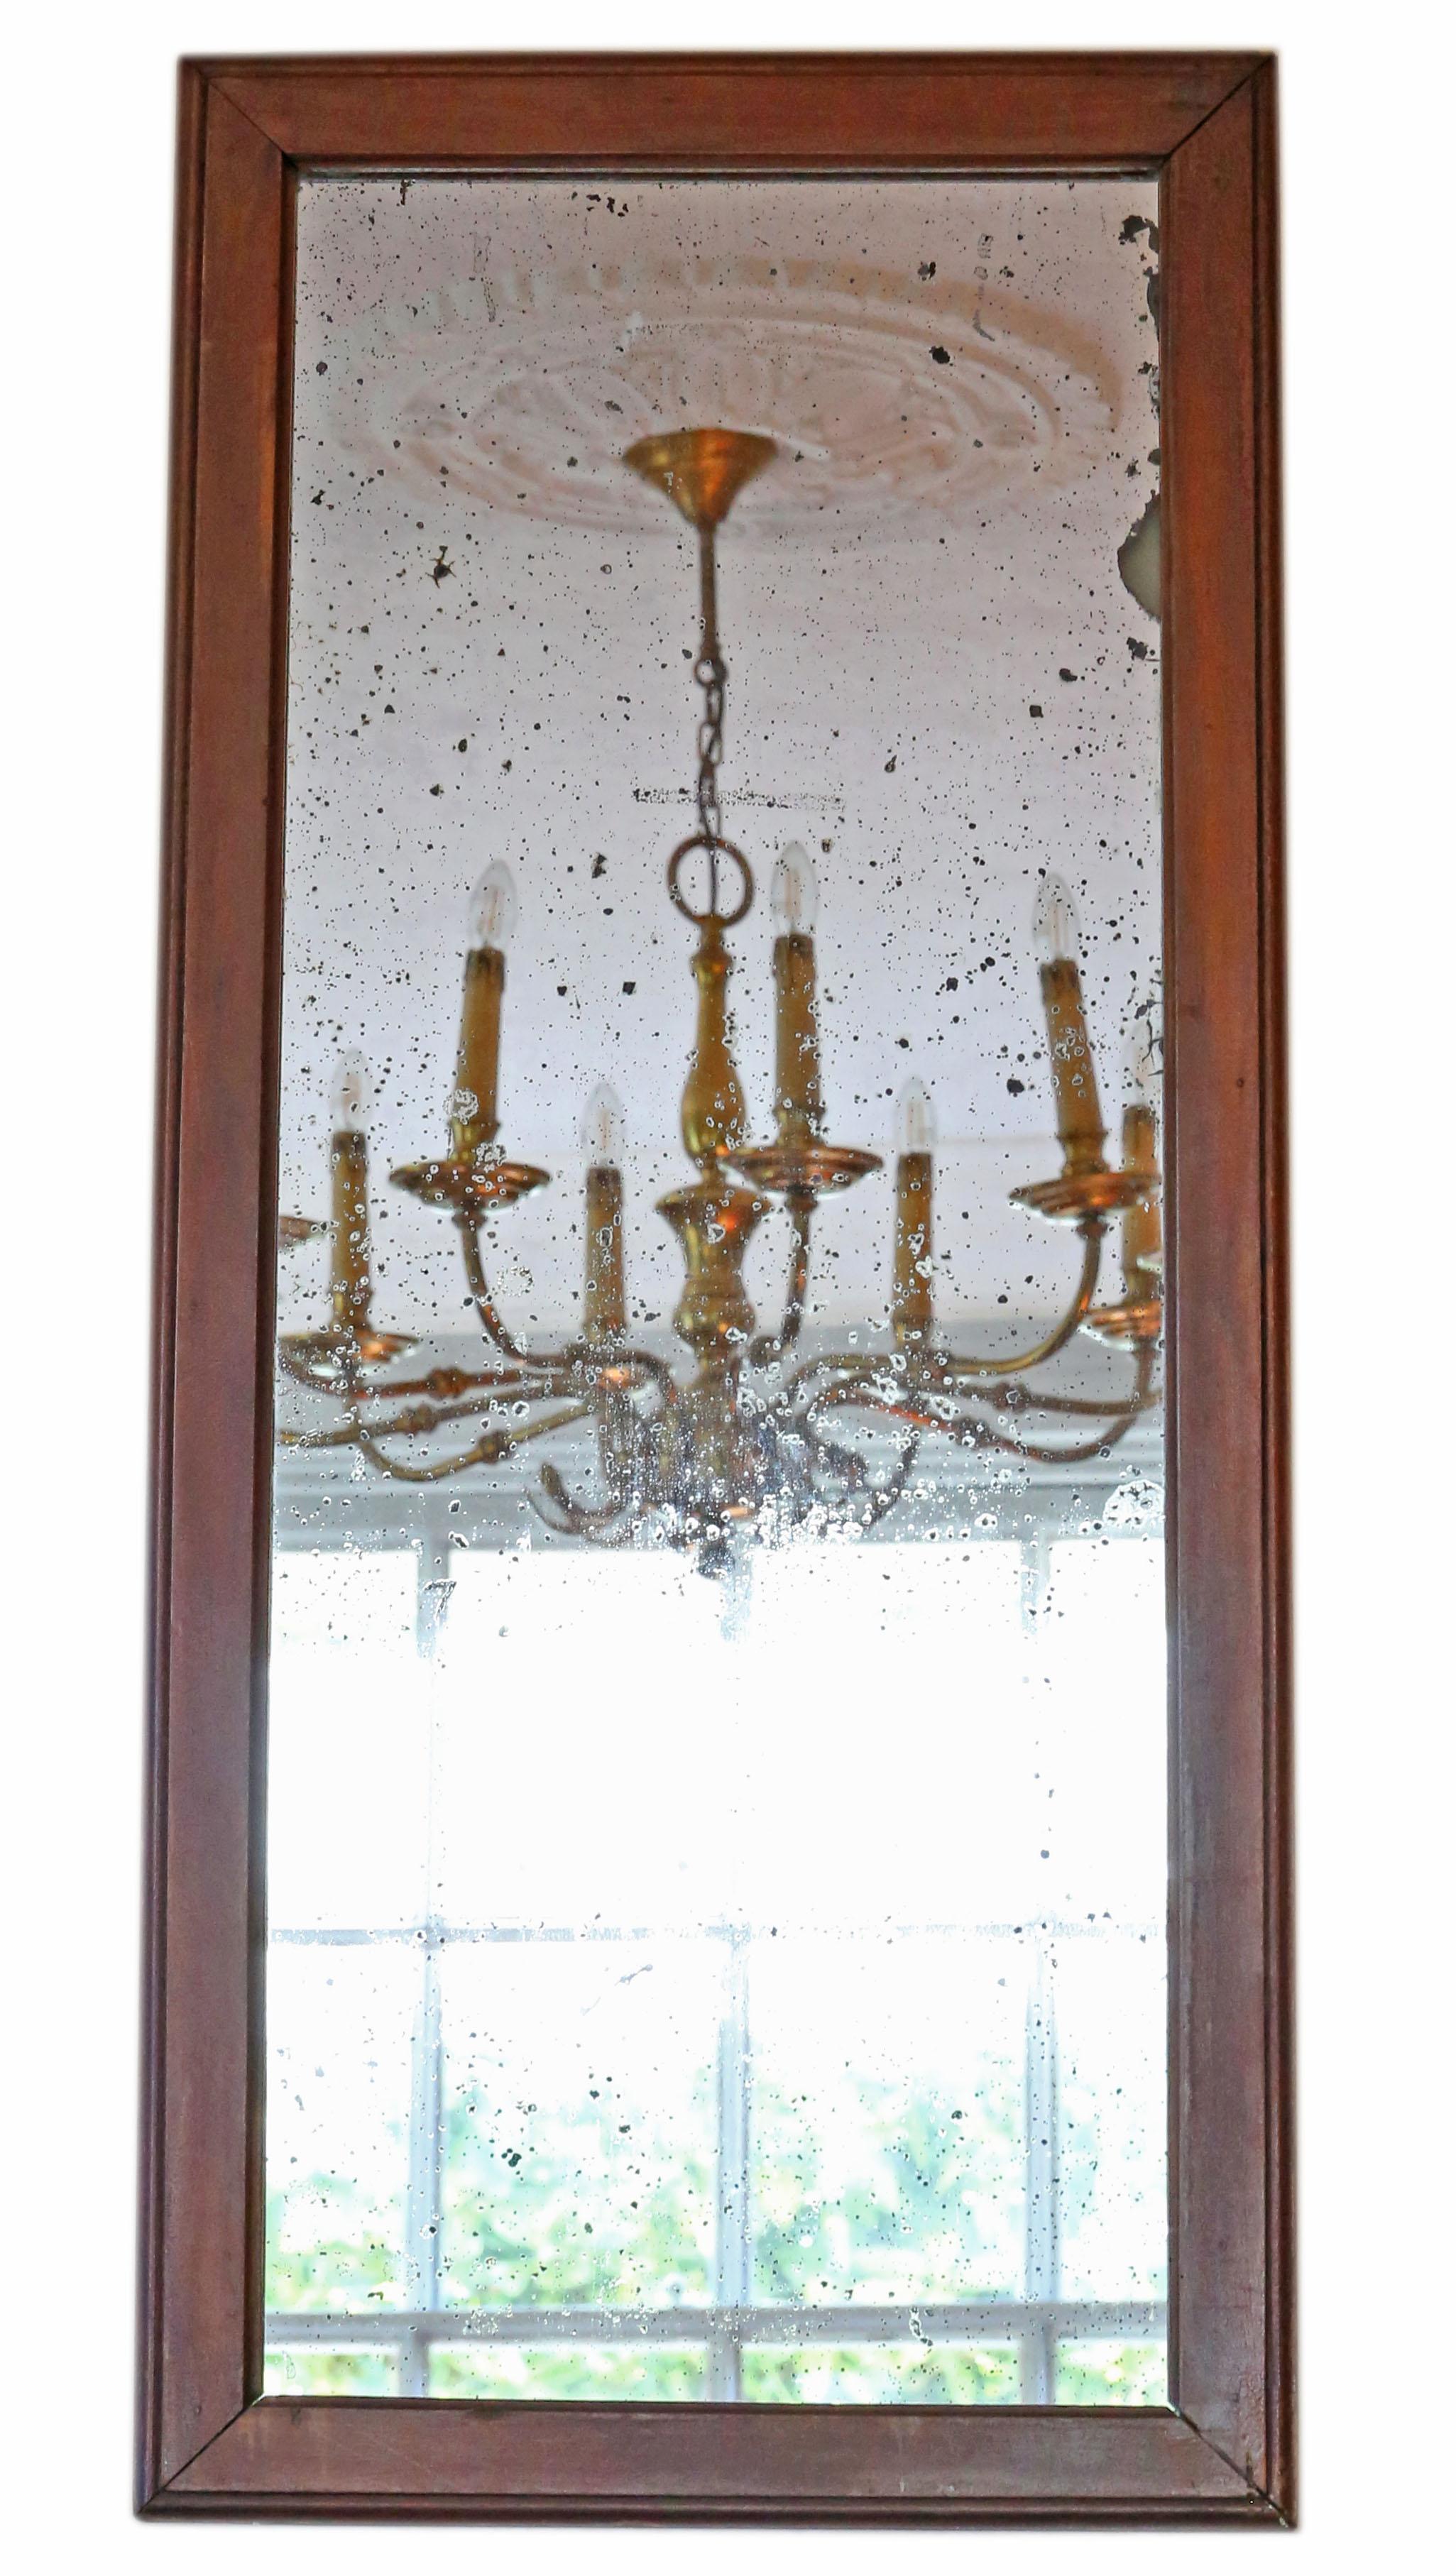 Antique large walnut overmantle or wall mirror, 19th century.

Would look amazing in the right location. No loose joints.

The mirrored glass has medium to heavy oxidation and other age related imperfections, however it still gives a sharp